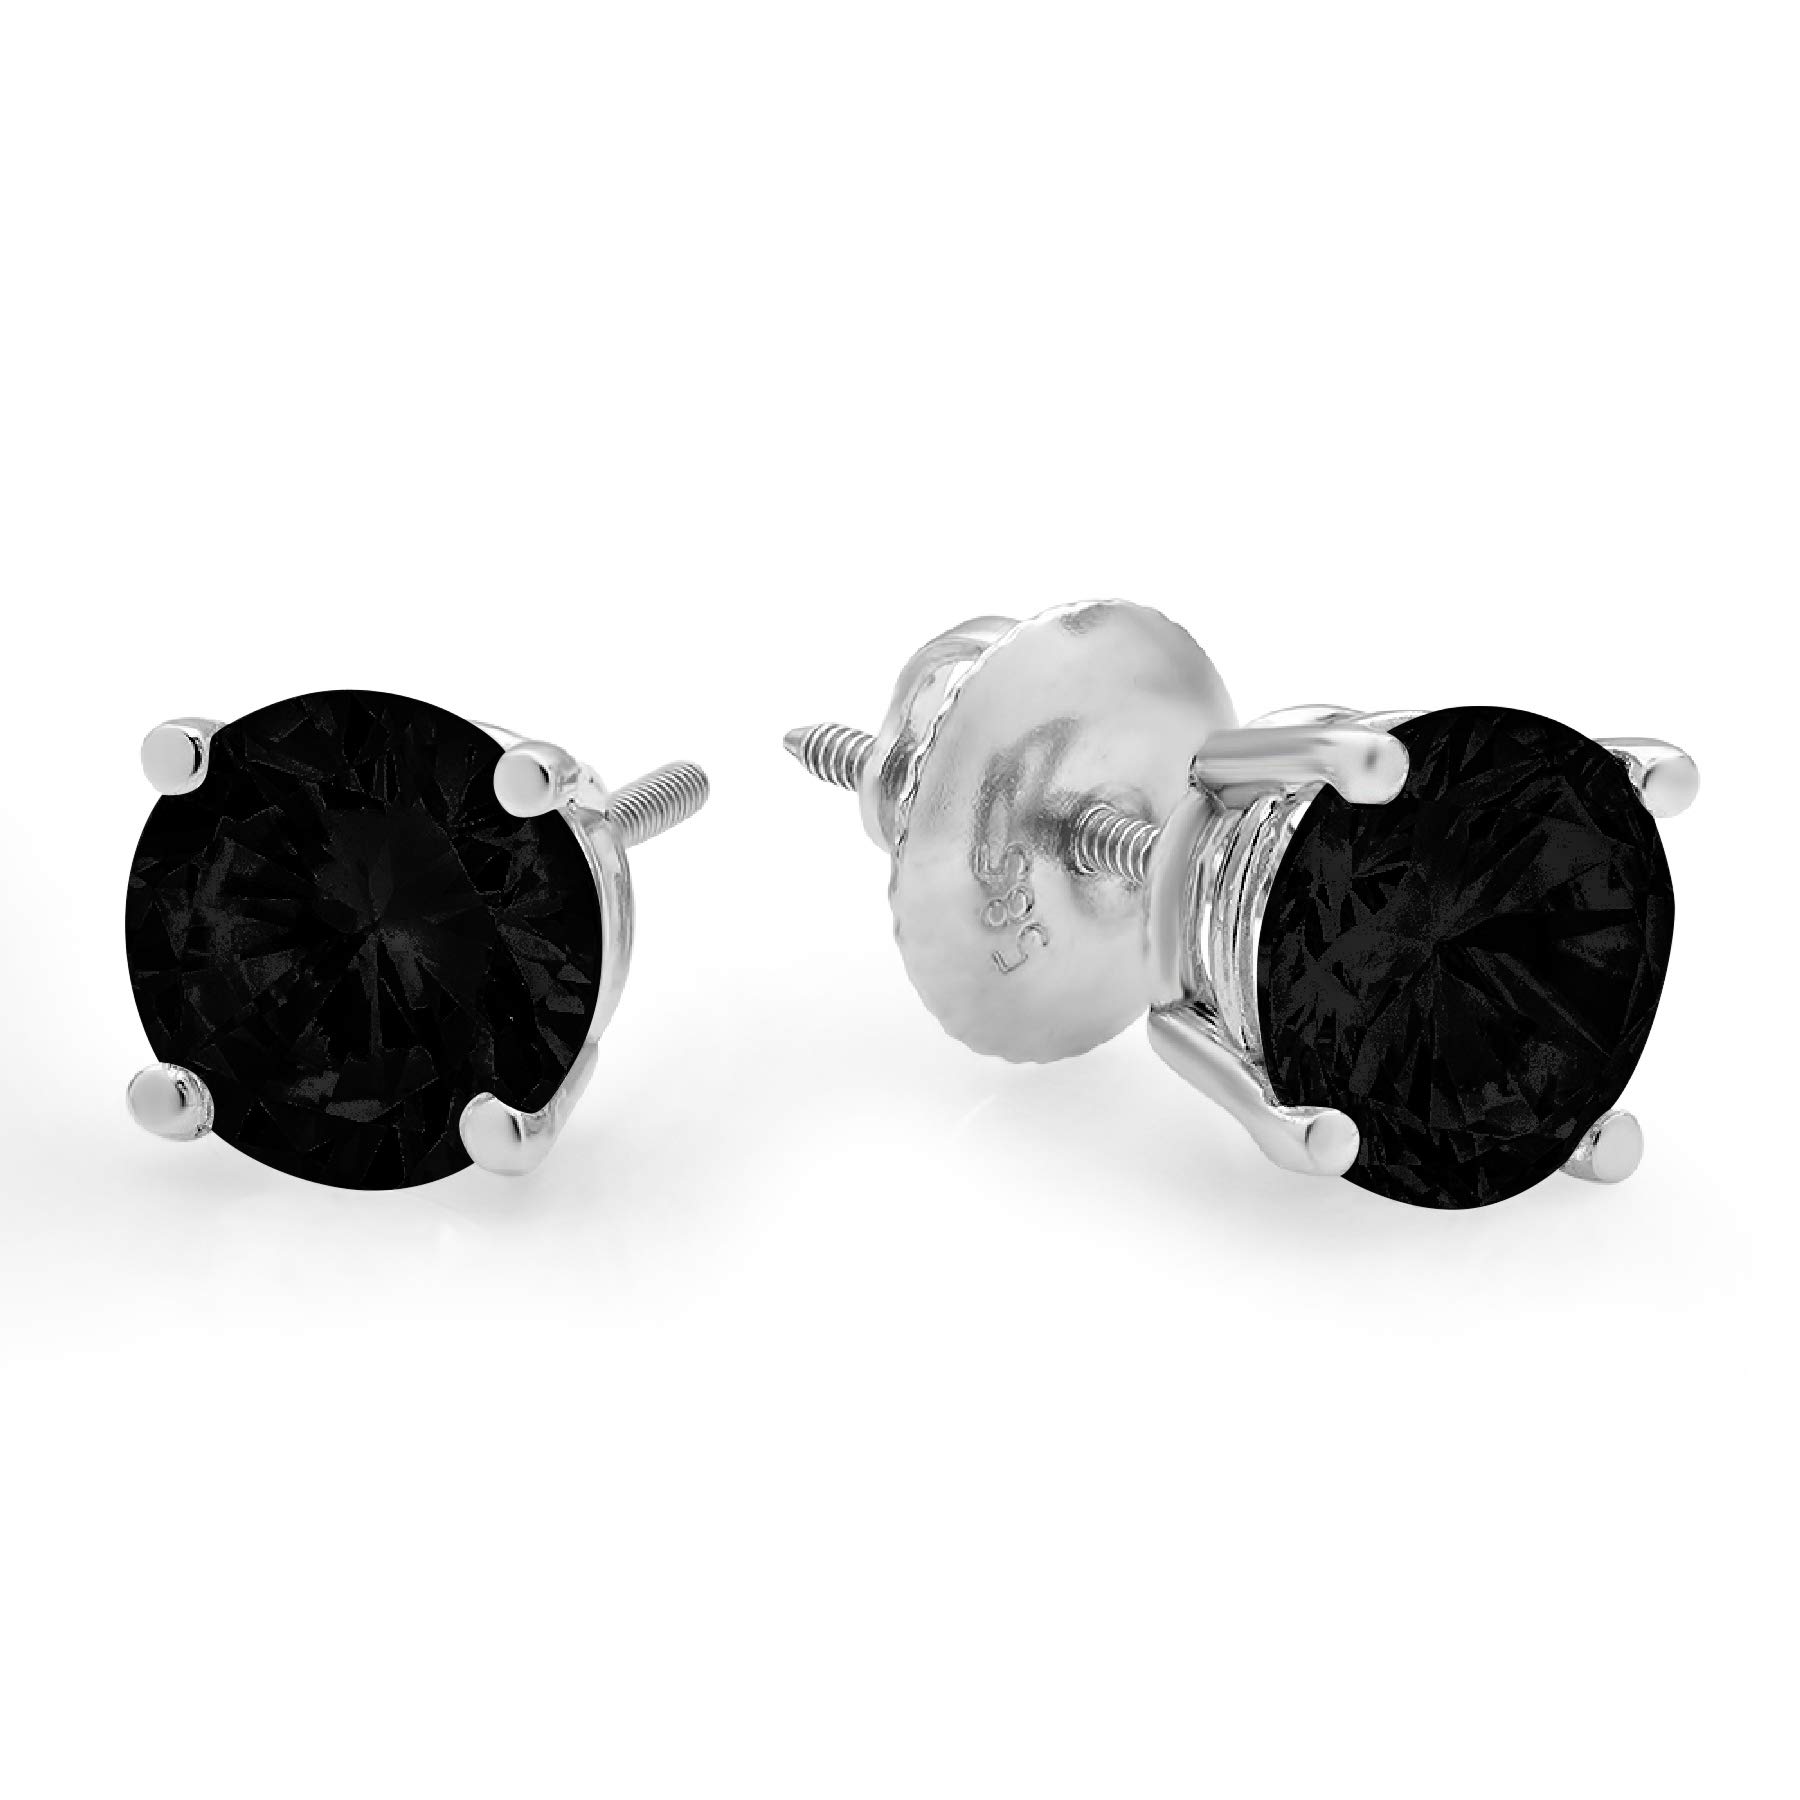 1.50 ct Brilliant Round Cut Solitaire Flawless Genuine Natural Black Onyx Gemstone VVS1 Ideal Pair of Designer Stud Earrings Solid 14k White Gold Screw Back